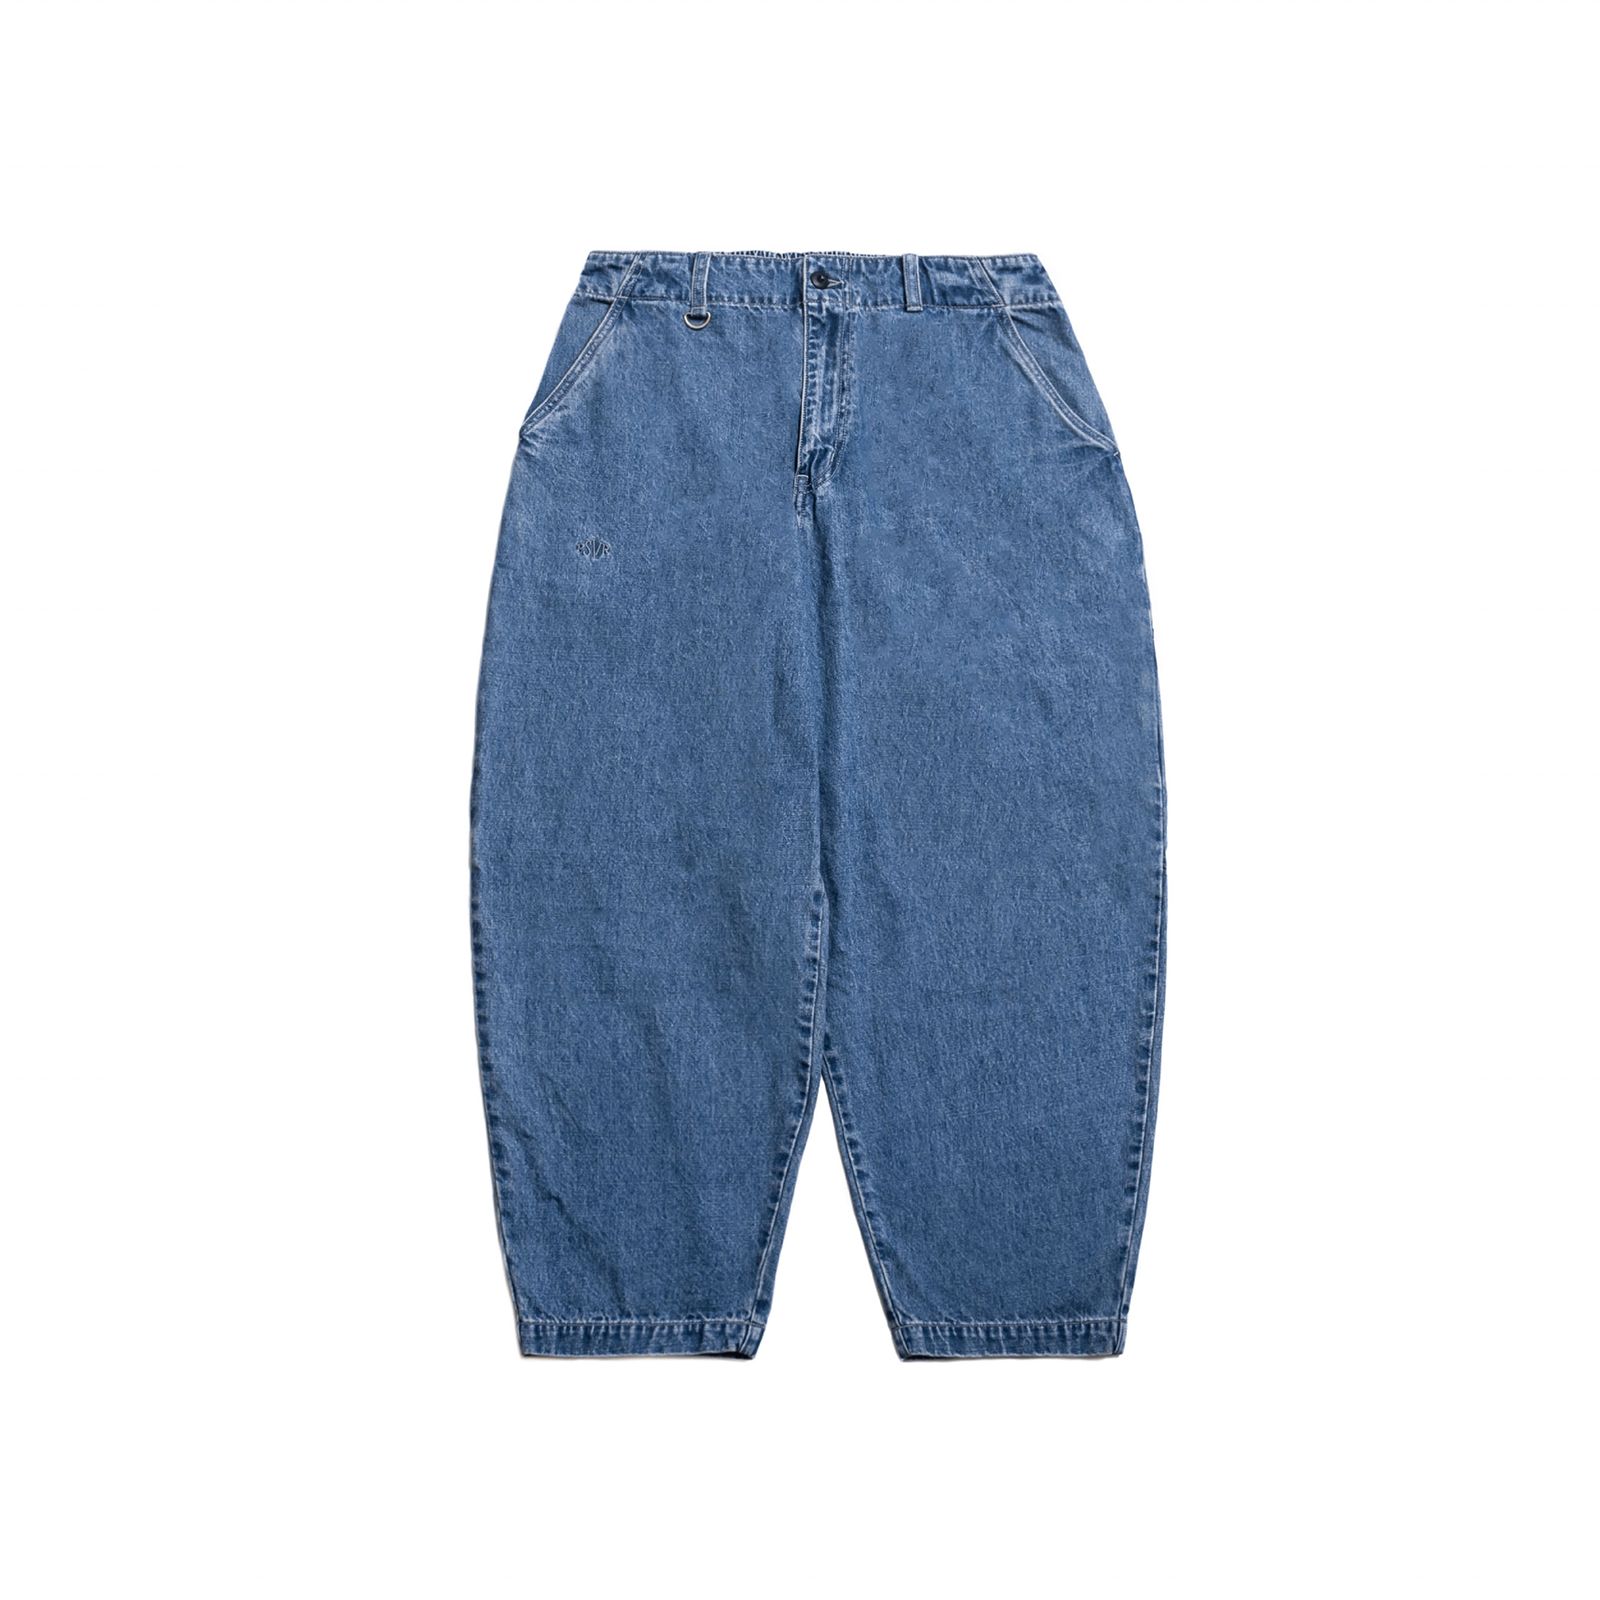 Persevere - 【ラスト1点 M】enzyme-stonewashed tapered jeans ...